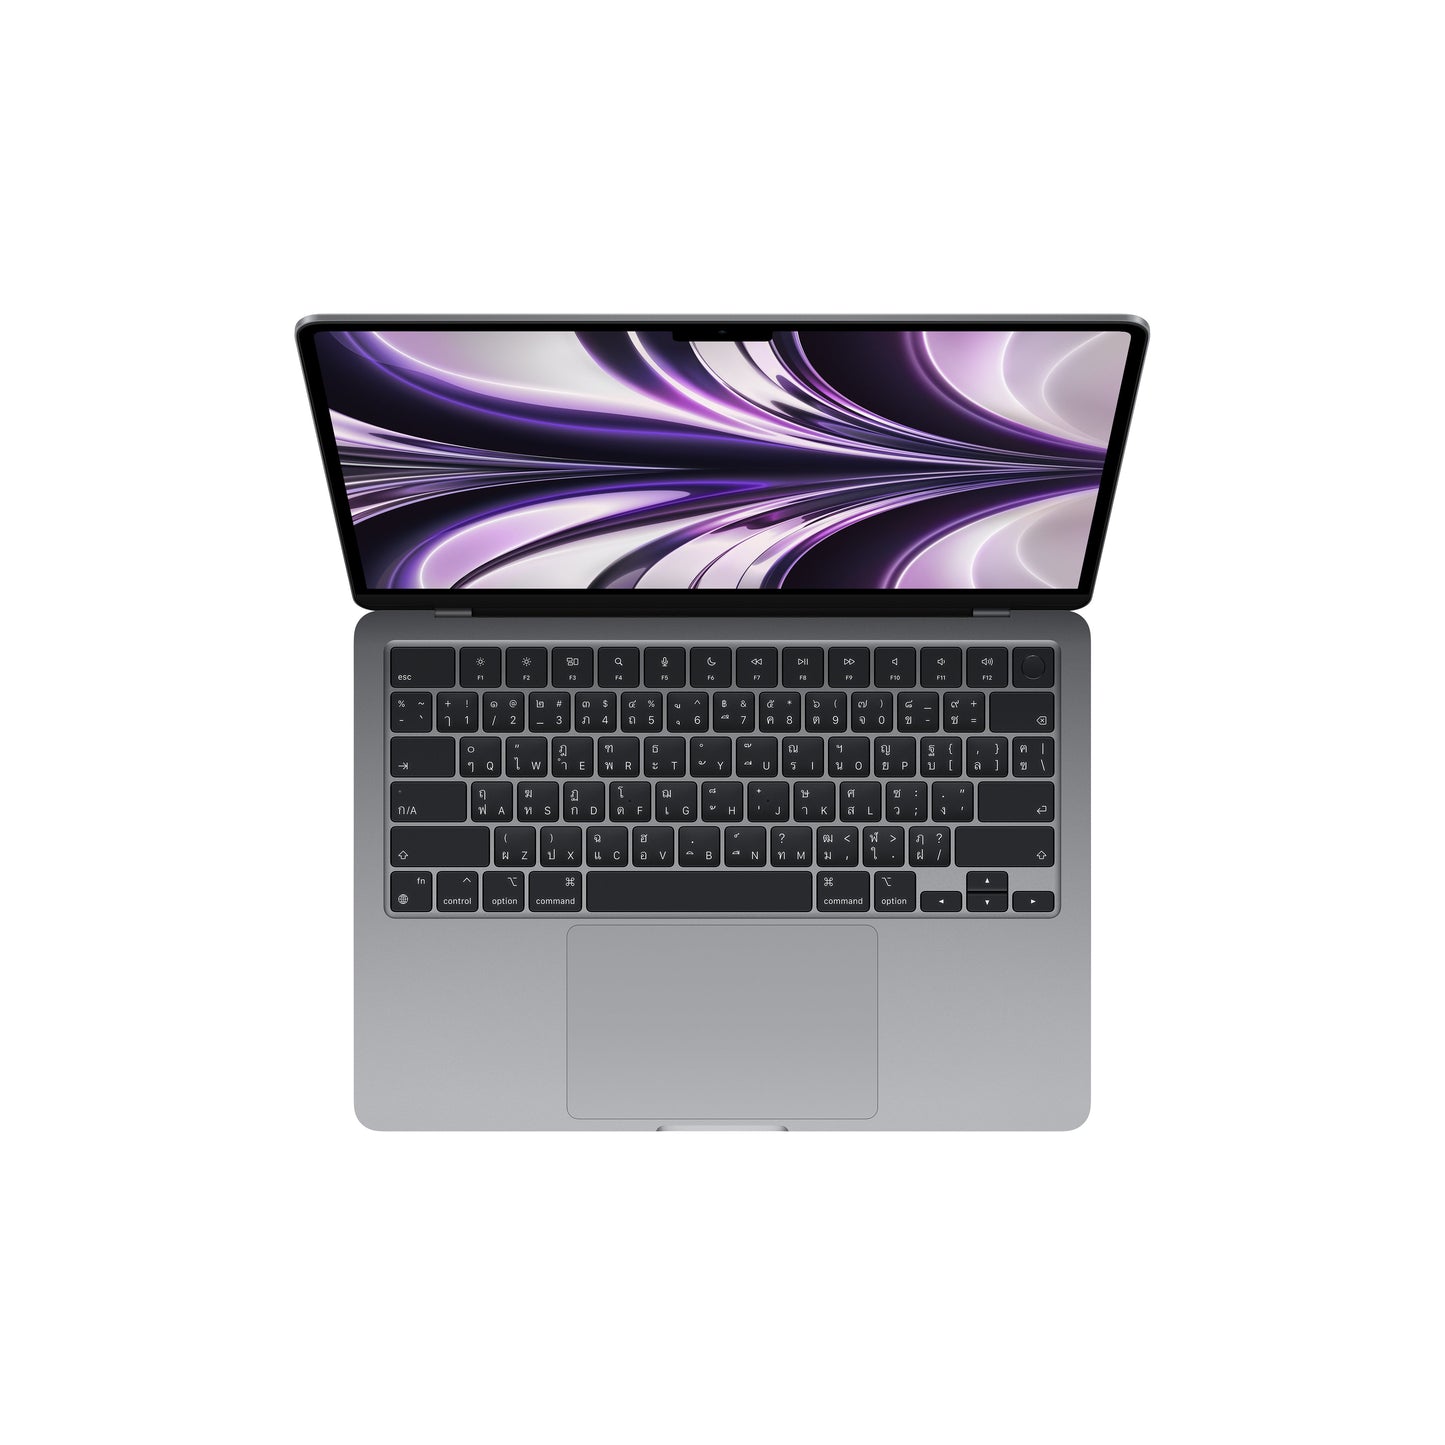 13-inch MacBook Pro: Apple M2 chip with 8‑core CPU and 10‑core GPU, 256GB SSD - Space Gray